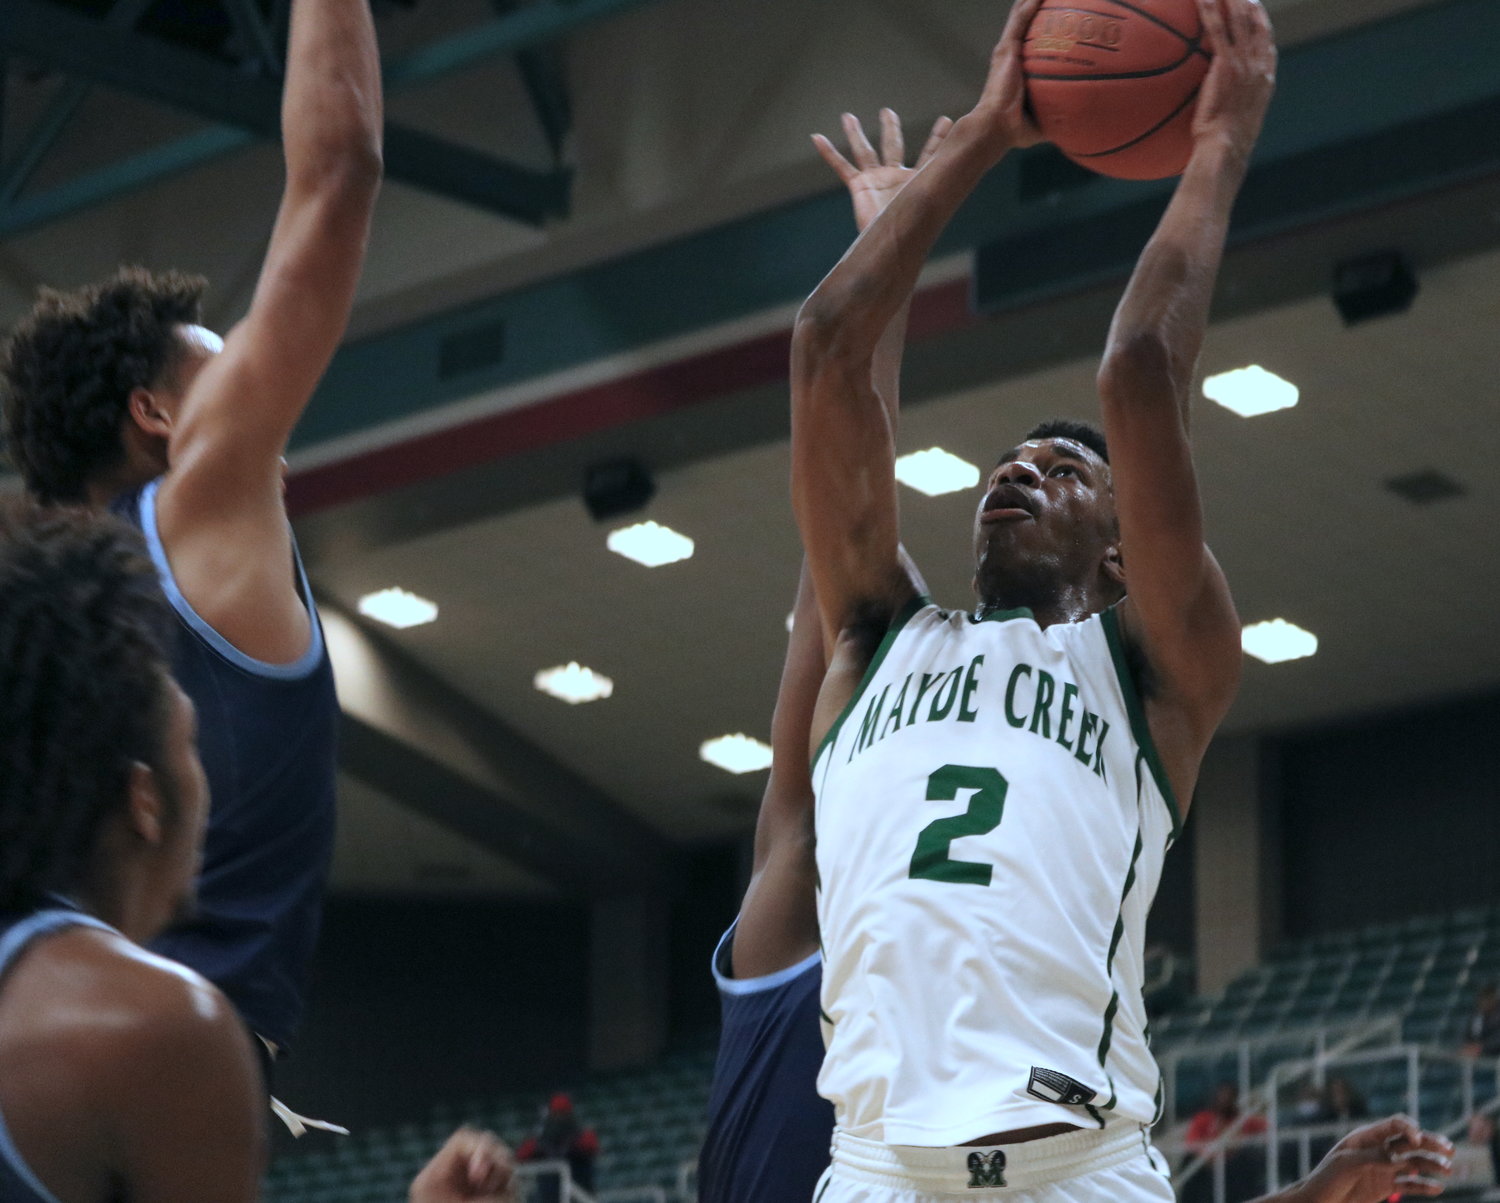 Caleb Davis shoots a layup during Tuesday’s Class 6A regional quarterfinal between Mayde Creek and Fort Bend Clements at the Merrell Center.